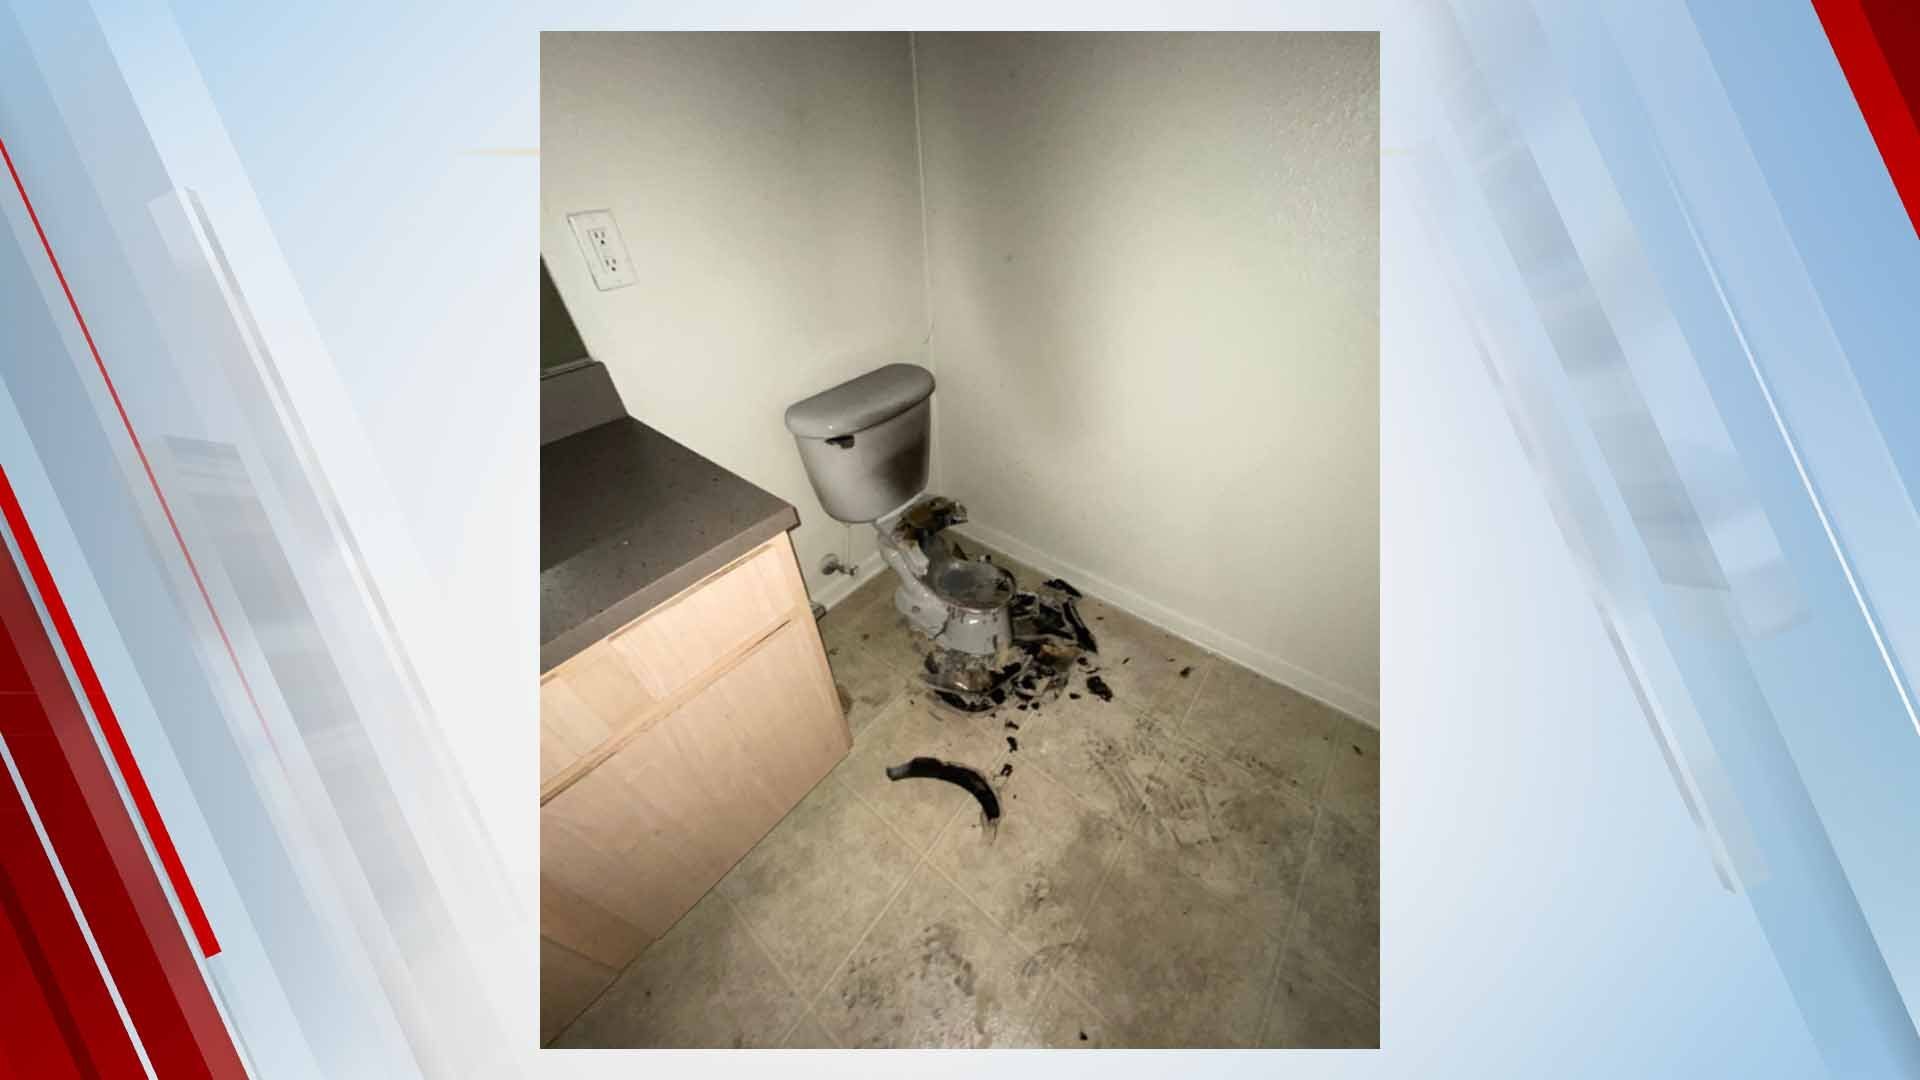 Firefighters: Lightning Bolt Strikes Toilet At Okmulgee Apartment Complex